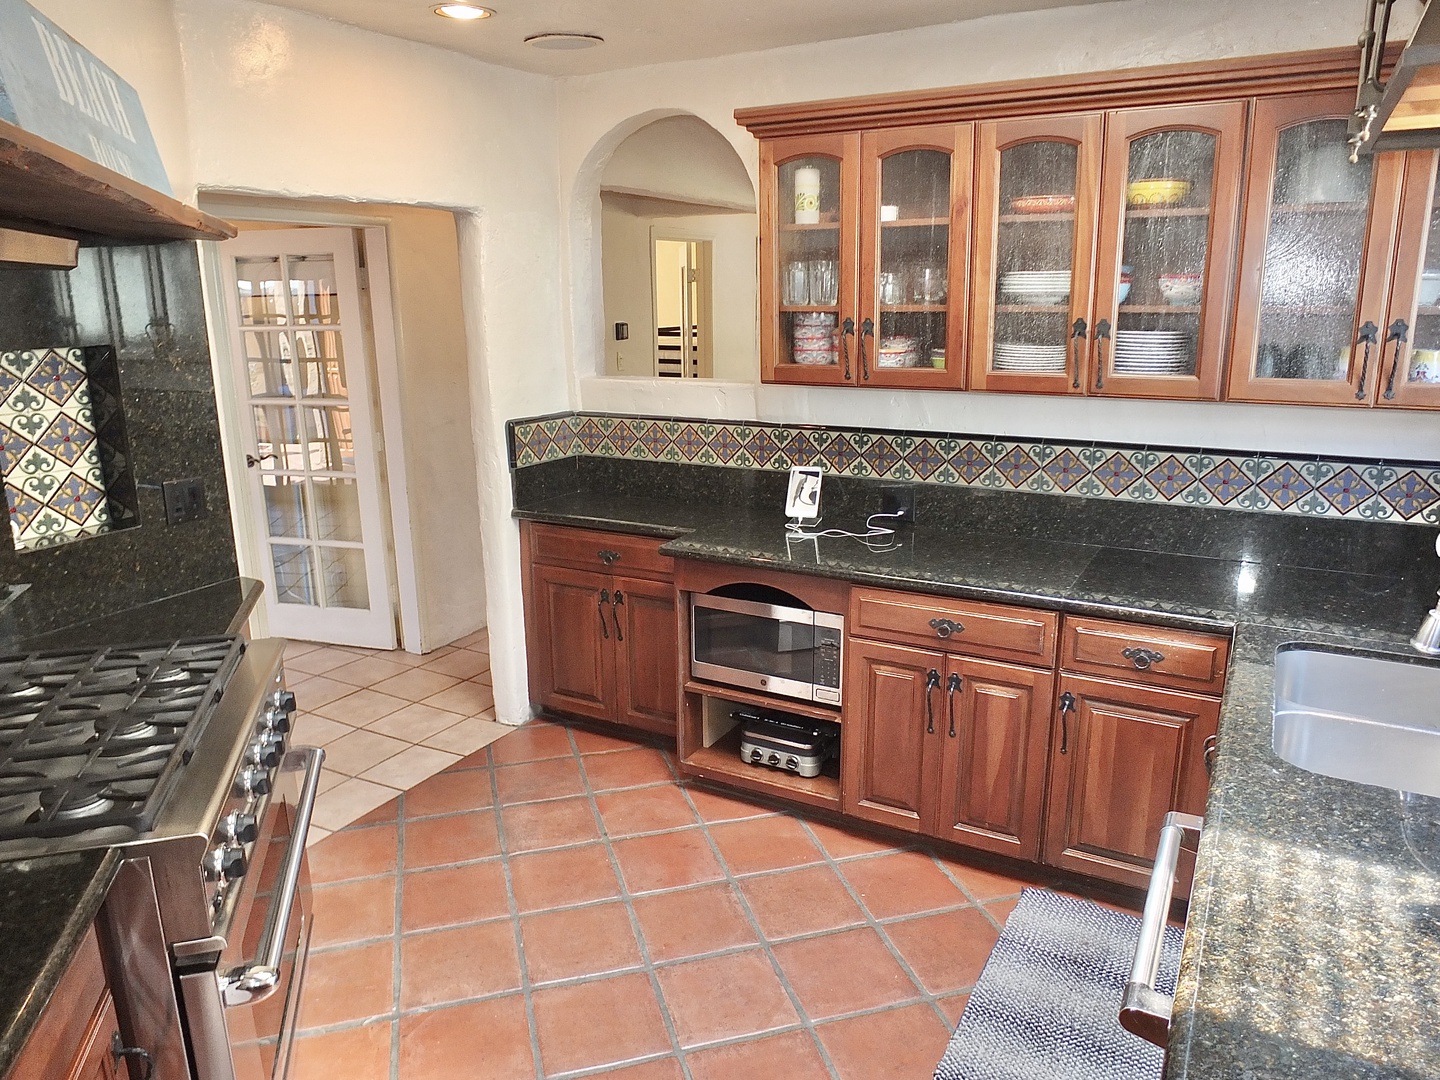 Enjoy beautiful amenities and sprawling counterspace in the updated kitchen